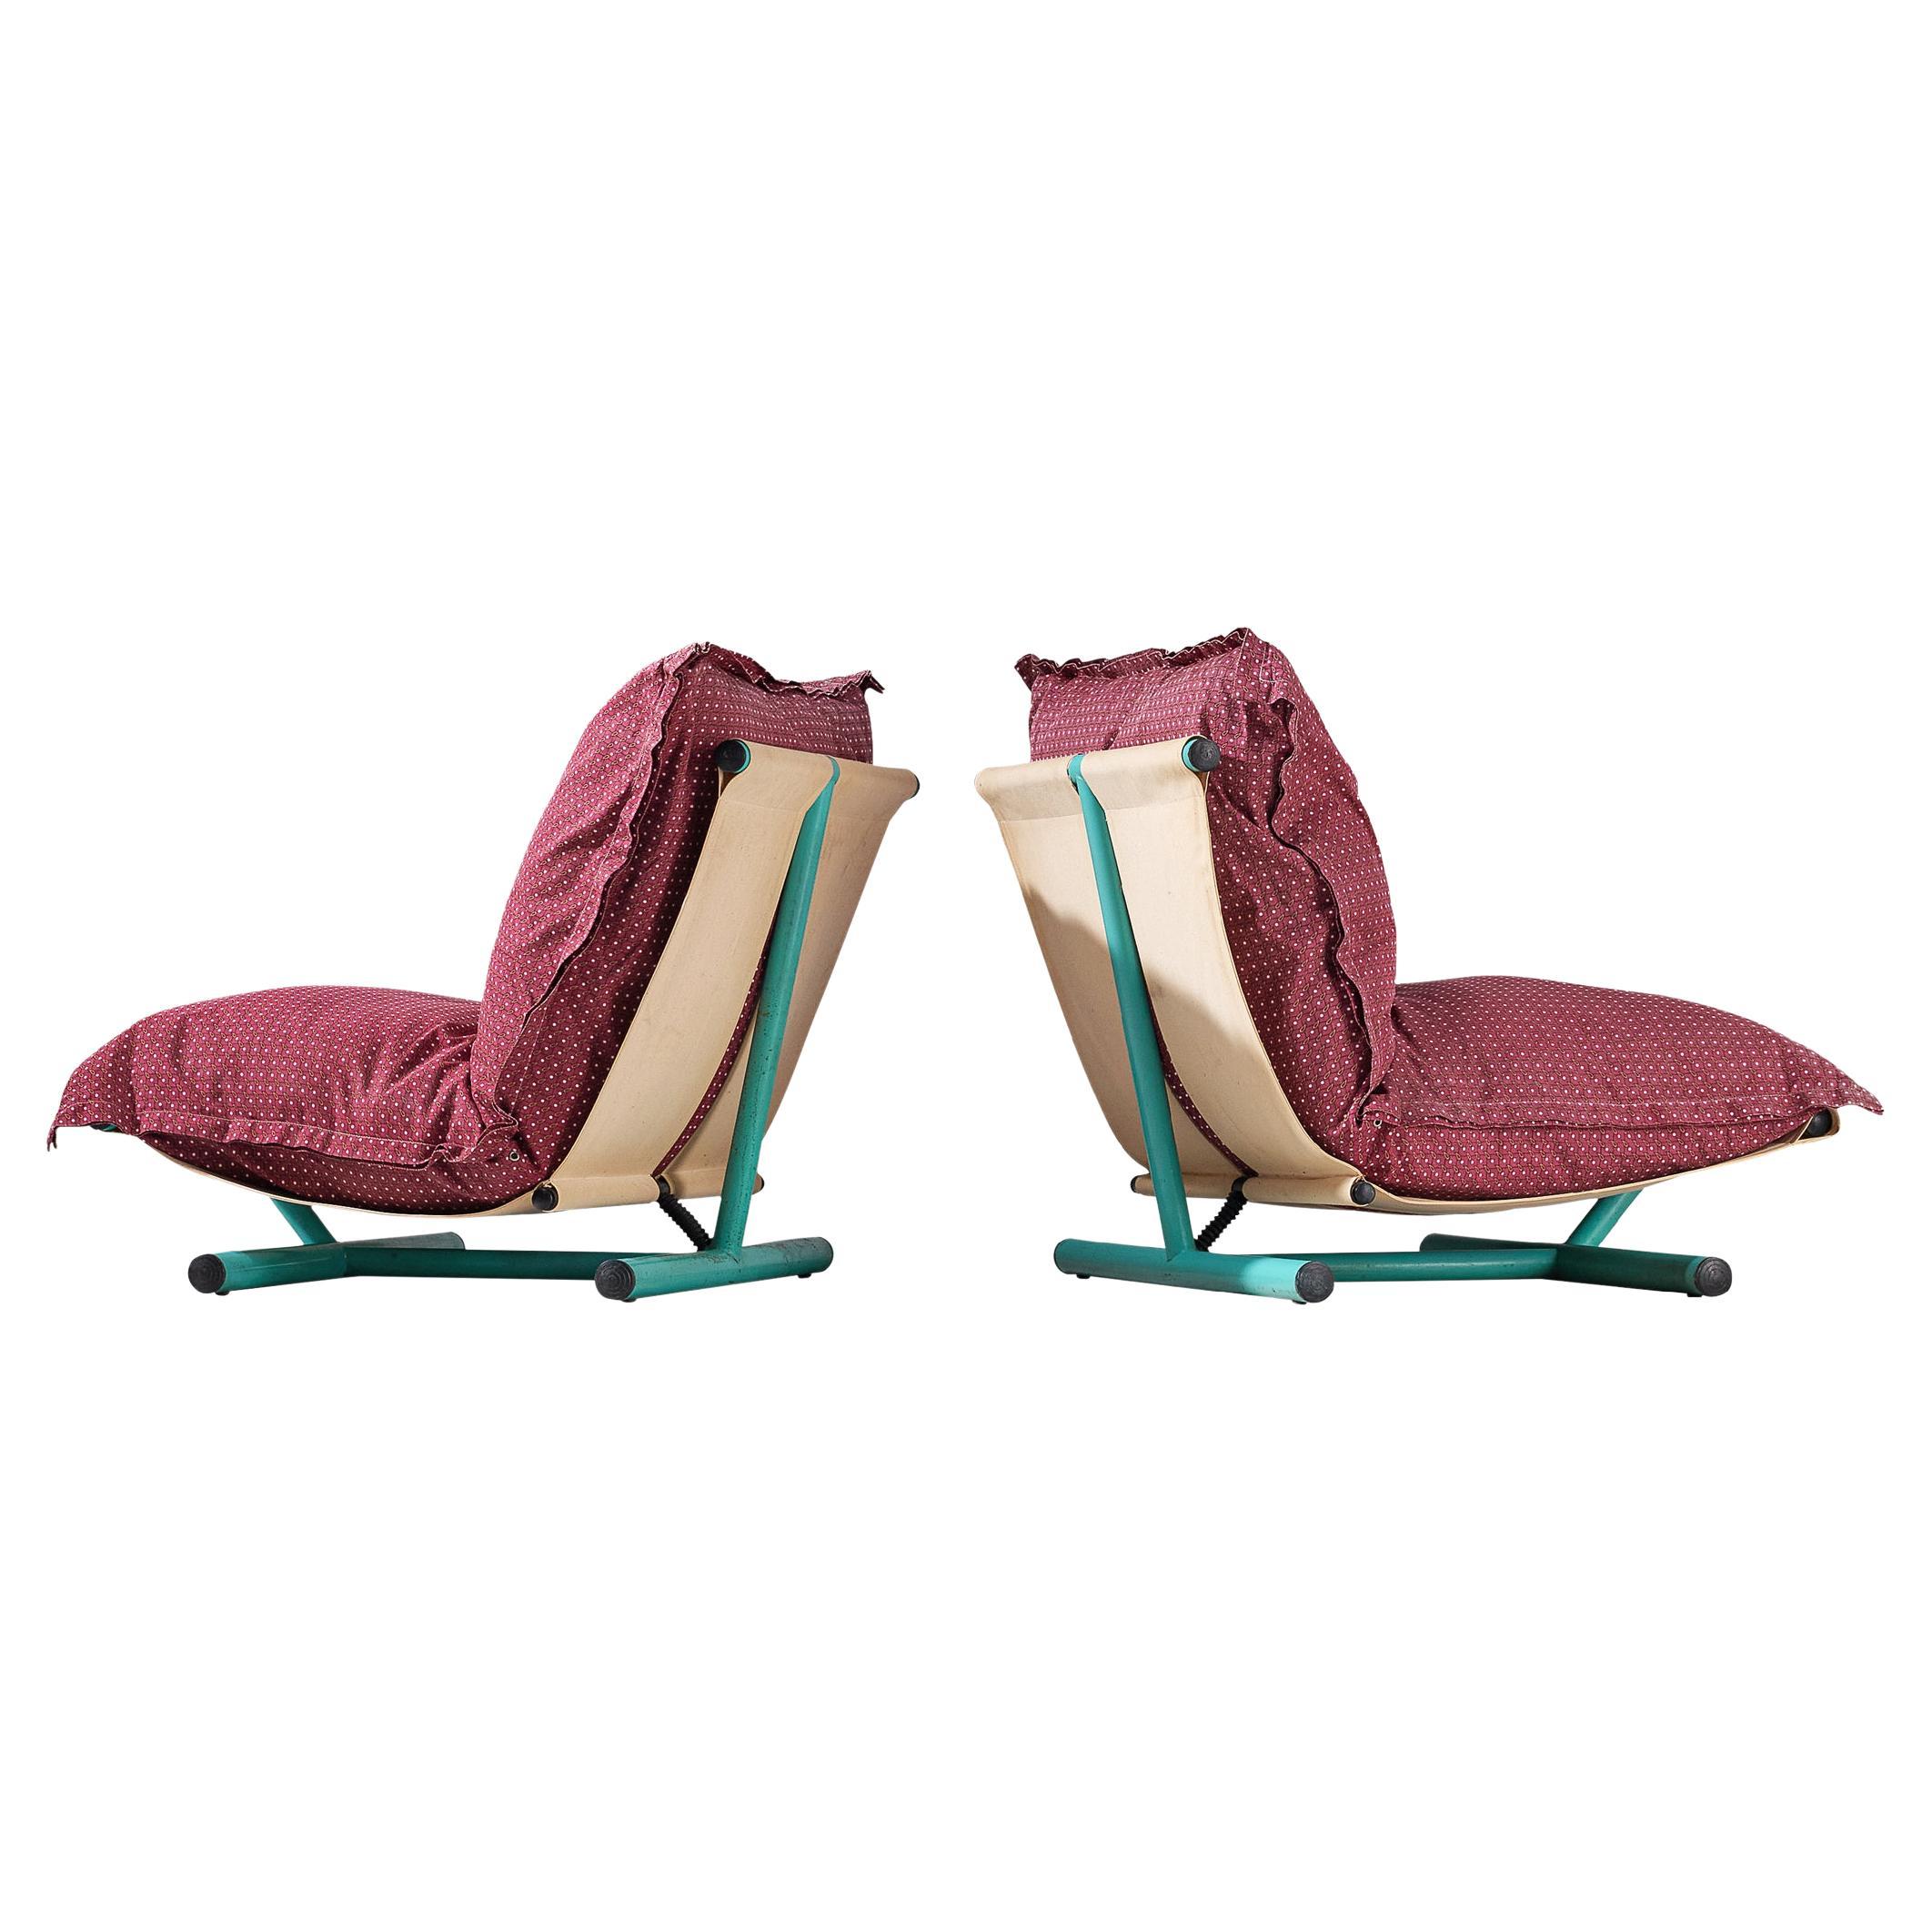 Roberto Lucci and Paolo Orlandini for Elam Pair of 'Farfalla' Lounge Chairs